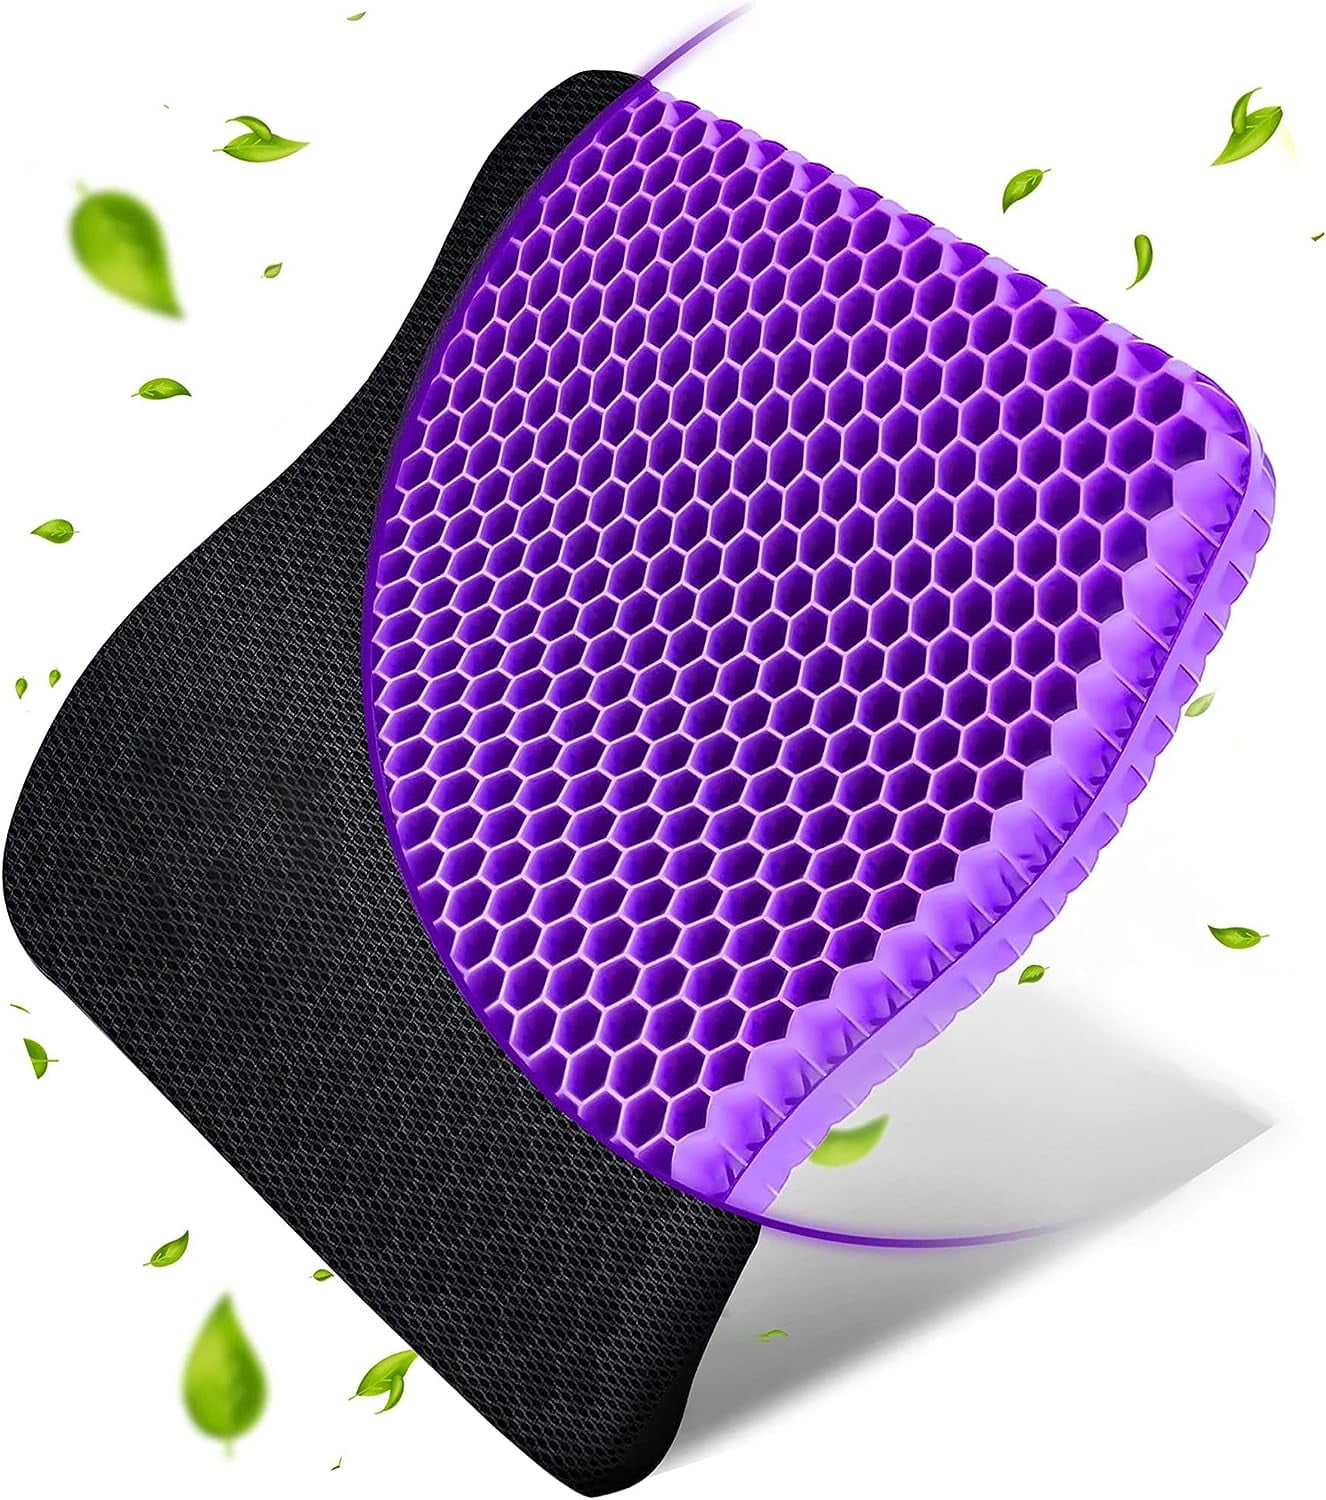 bingyee Gel Seat Cushion 1.8 Inch Thick Double Gel Orthopedic Seat Cushion  Pad for Pressure Relief Gel Sits Perfect for Office Chair, Car, Home